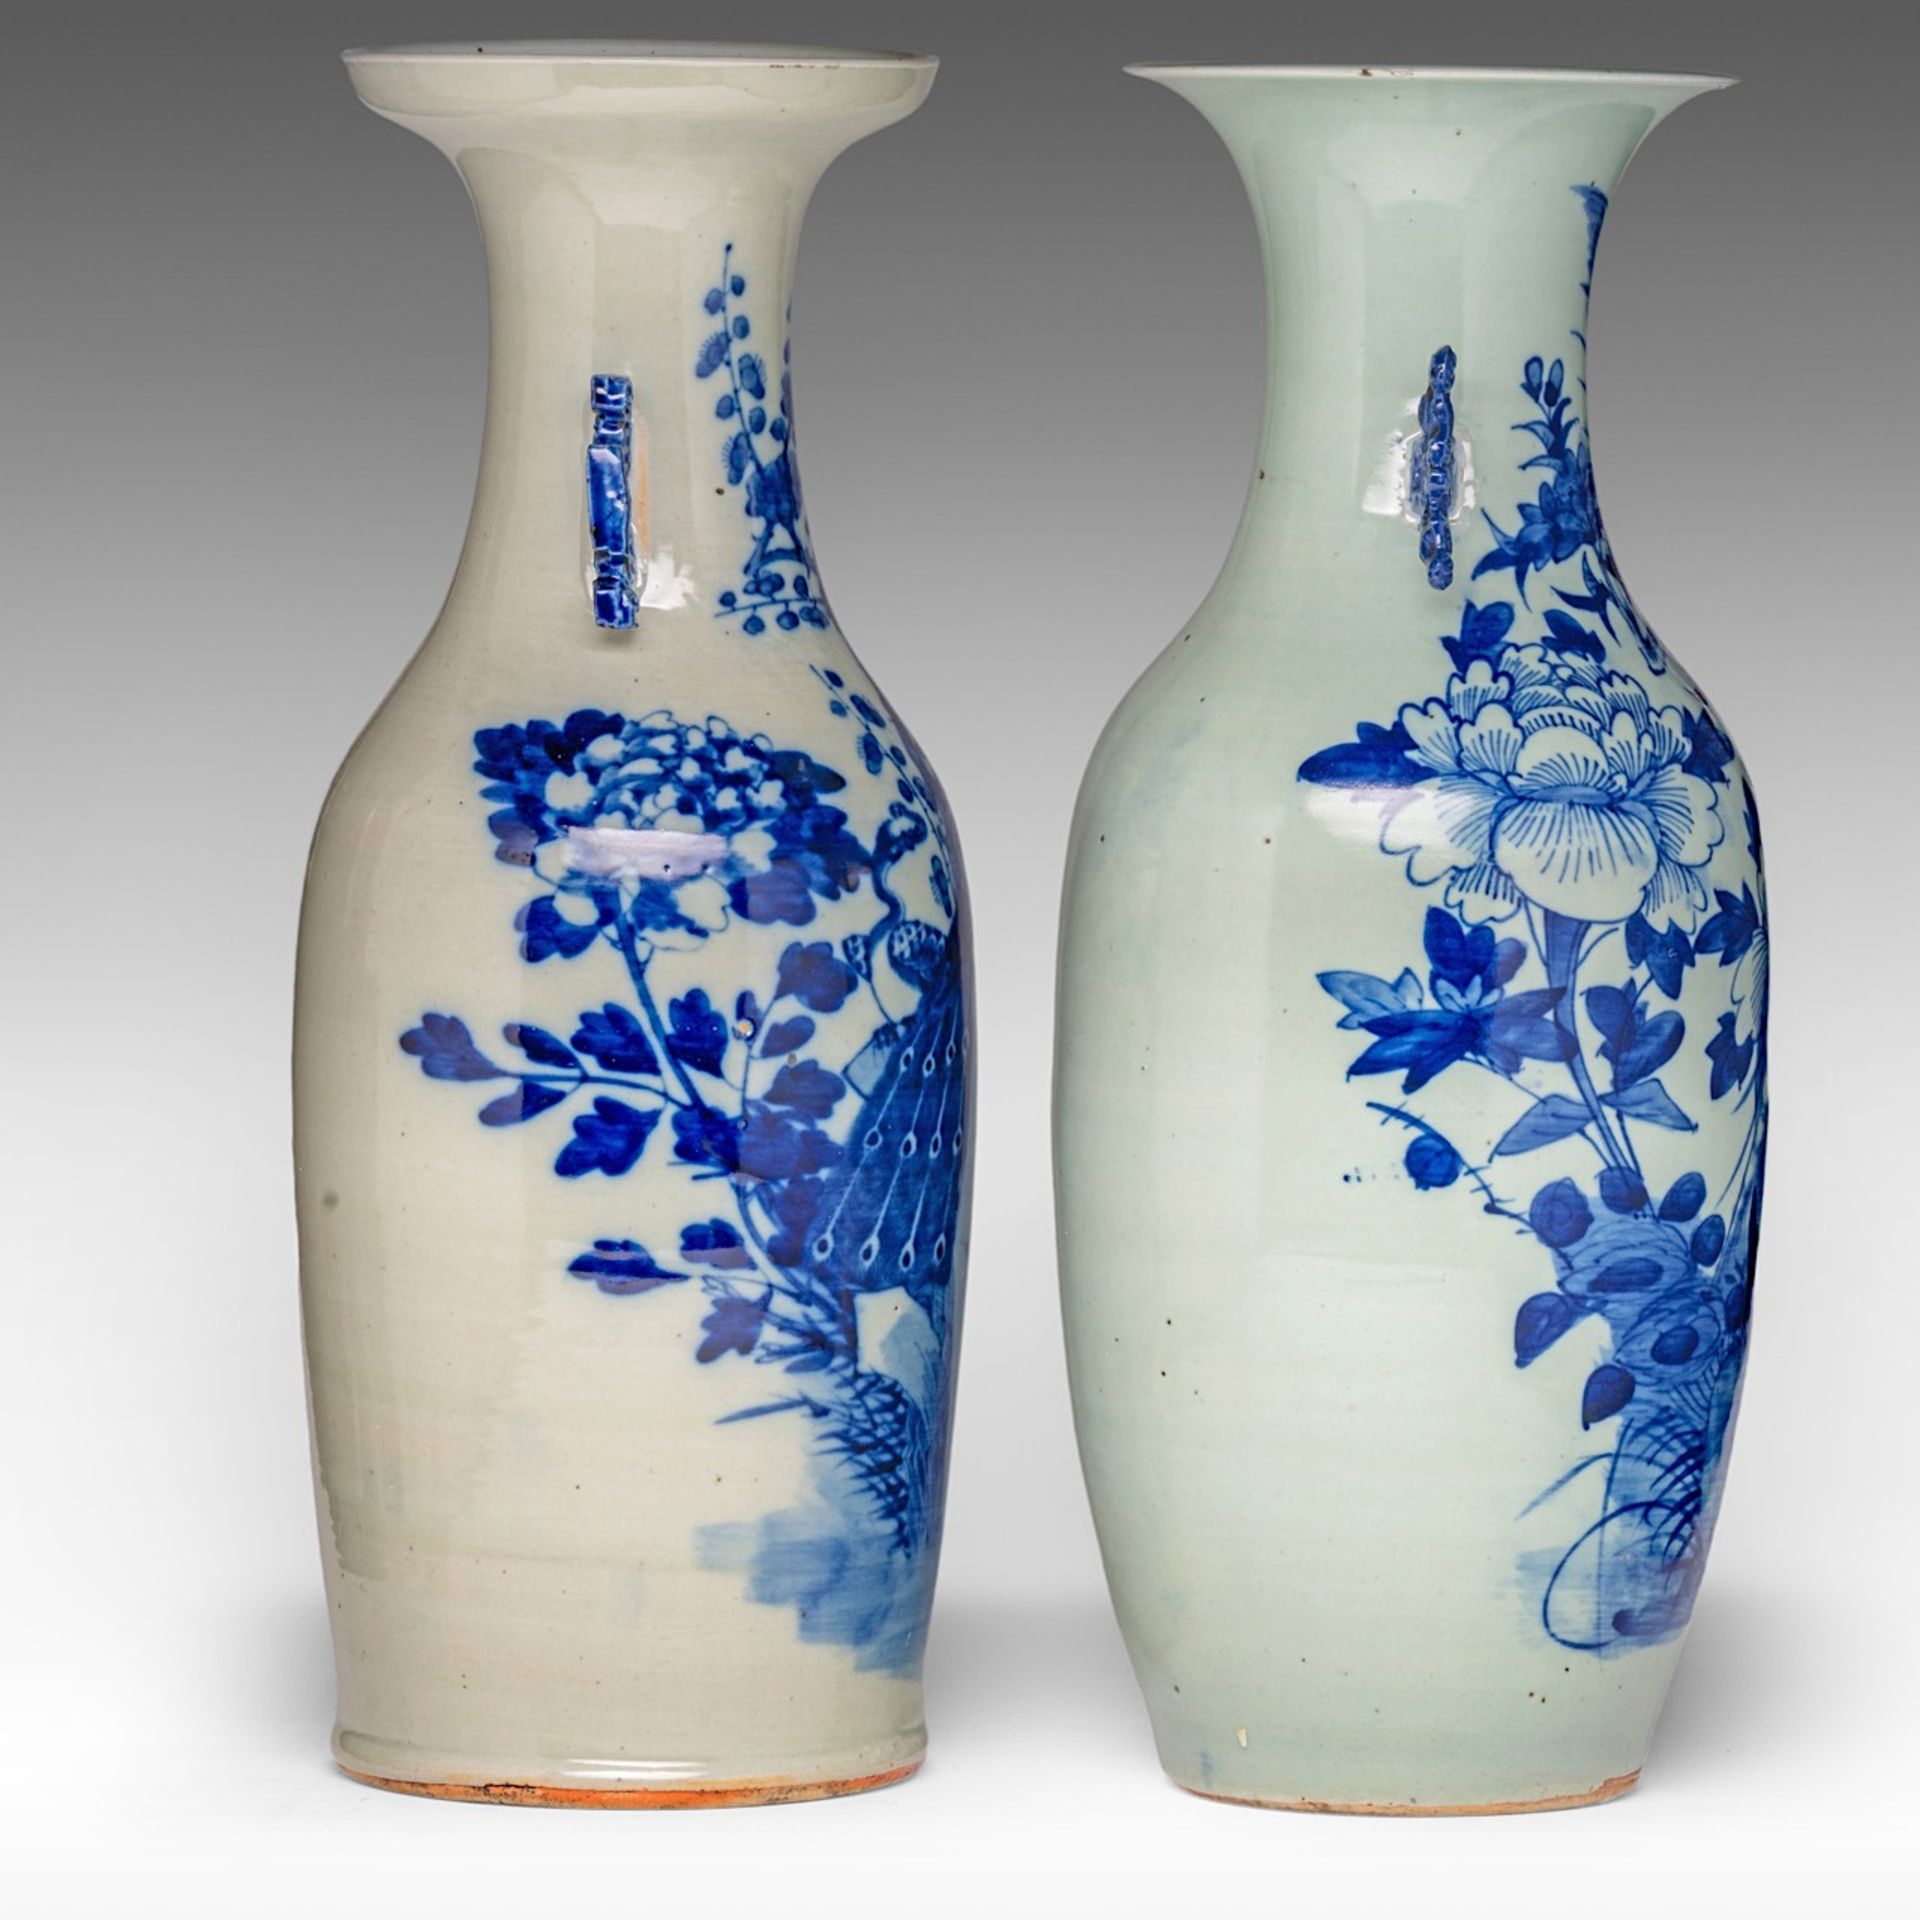 Four Chinese blue and white on celadon ground 'Flowers and birds' vases, late 19thC, H 57 - 58 cm - Image 9 of 13